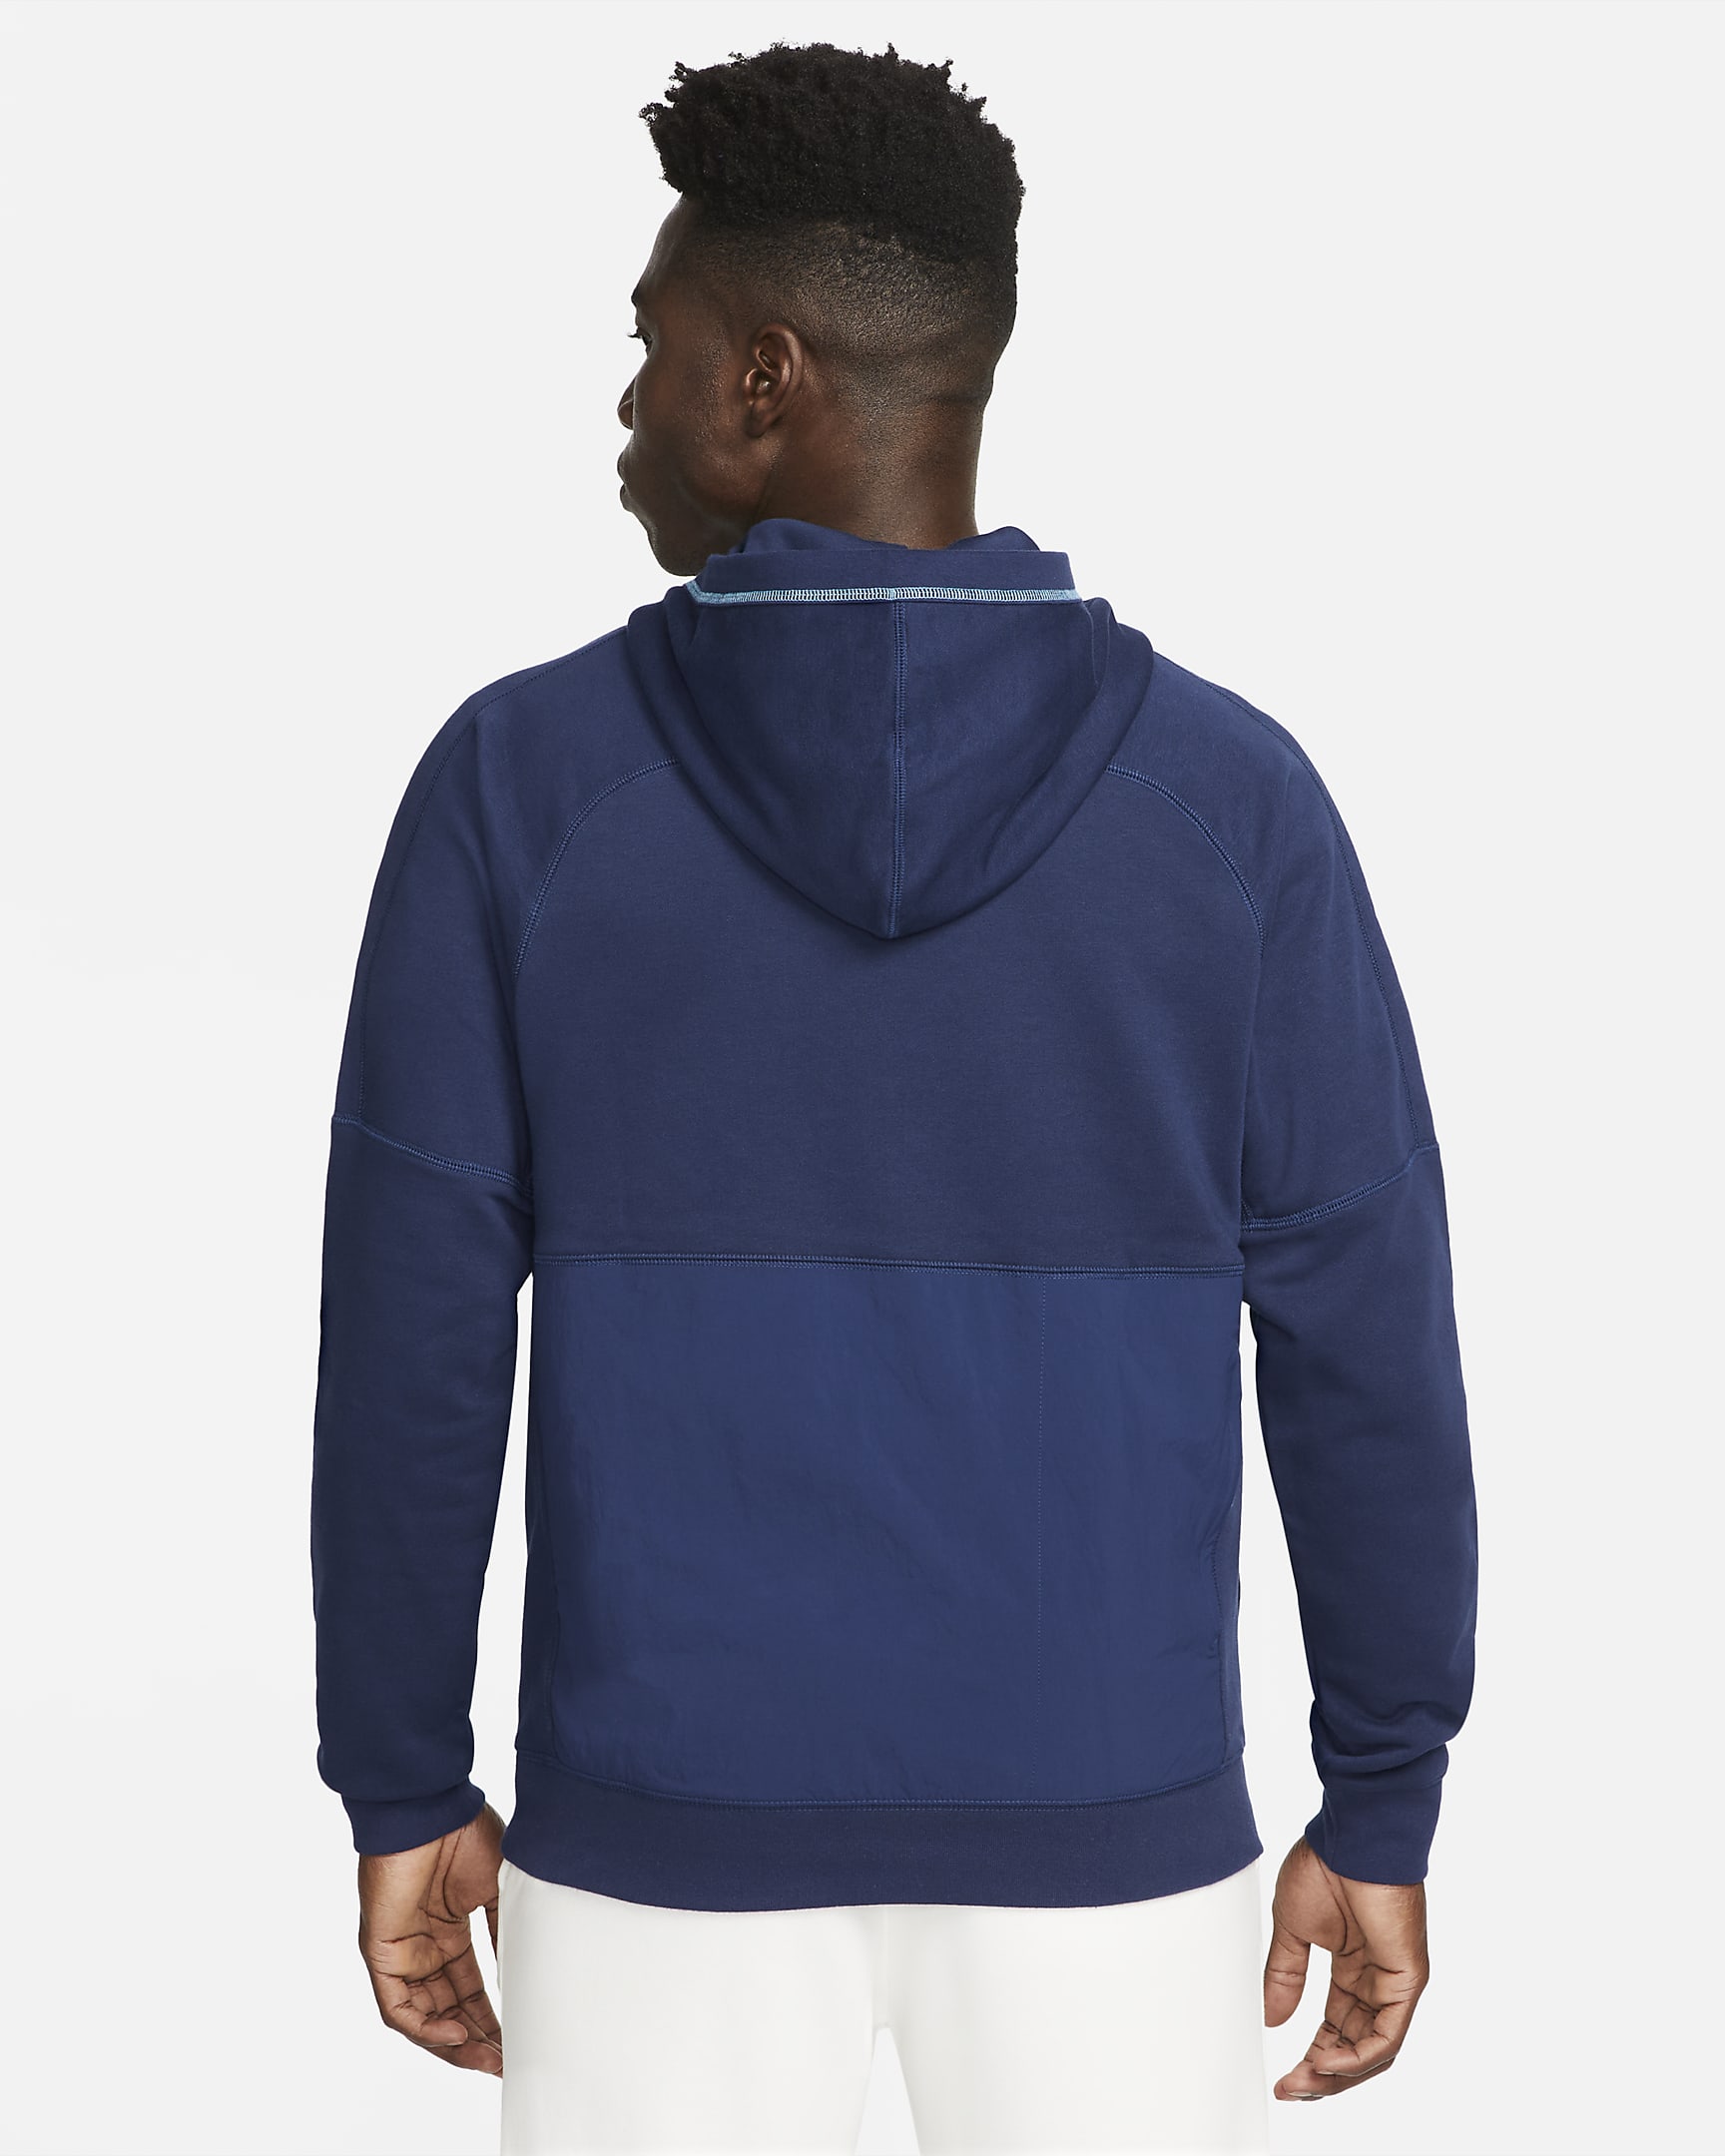 England Men's French Terry Soccer Hoodie. Nike.com